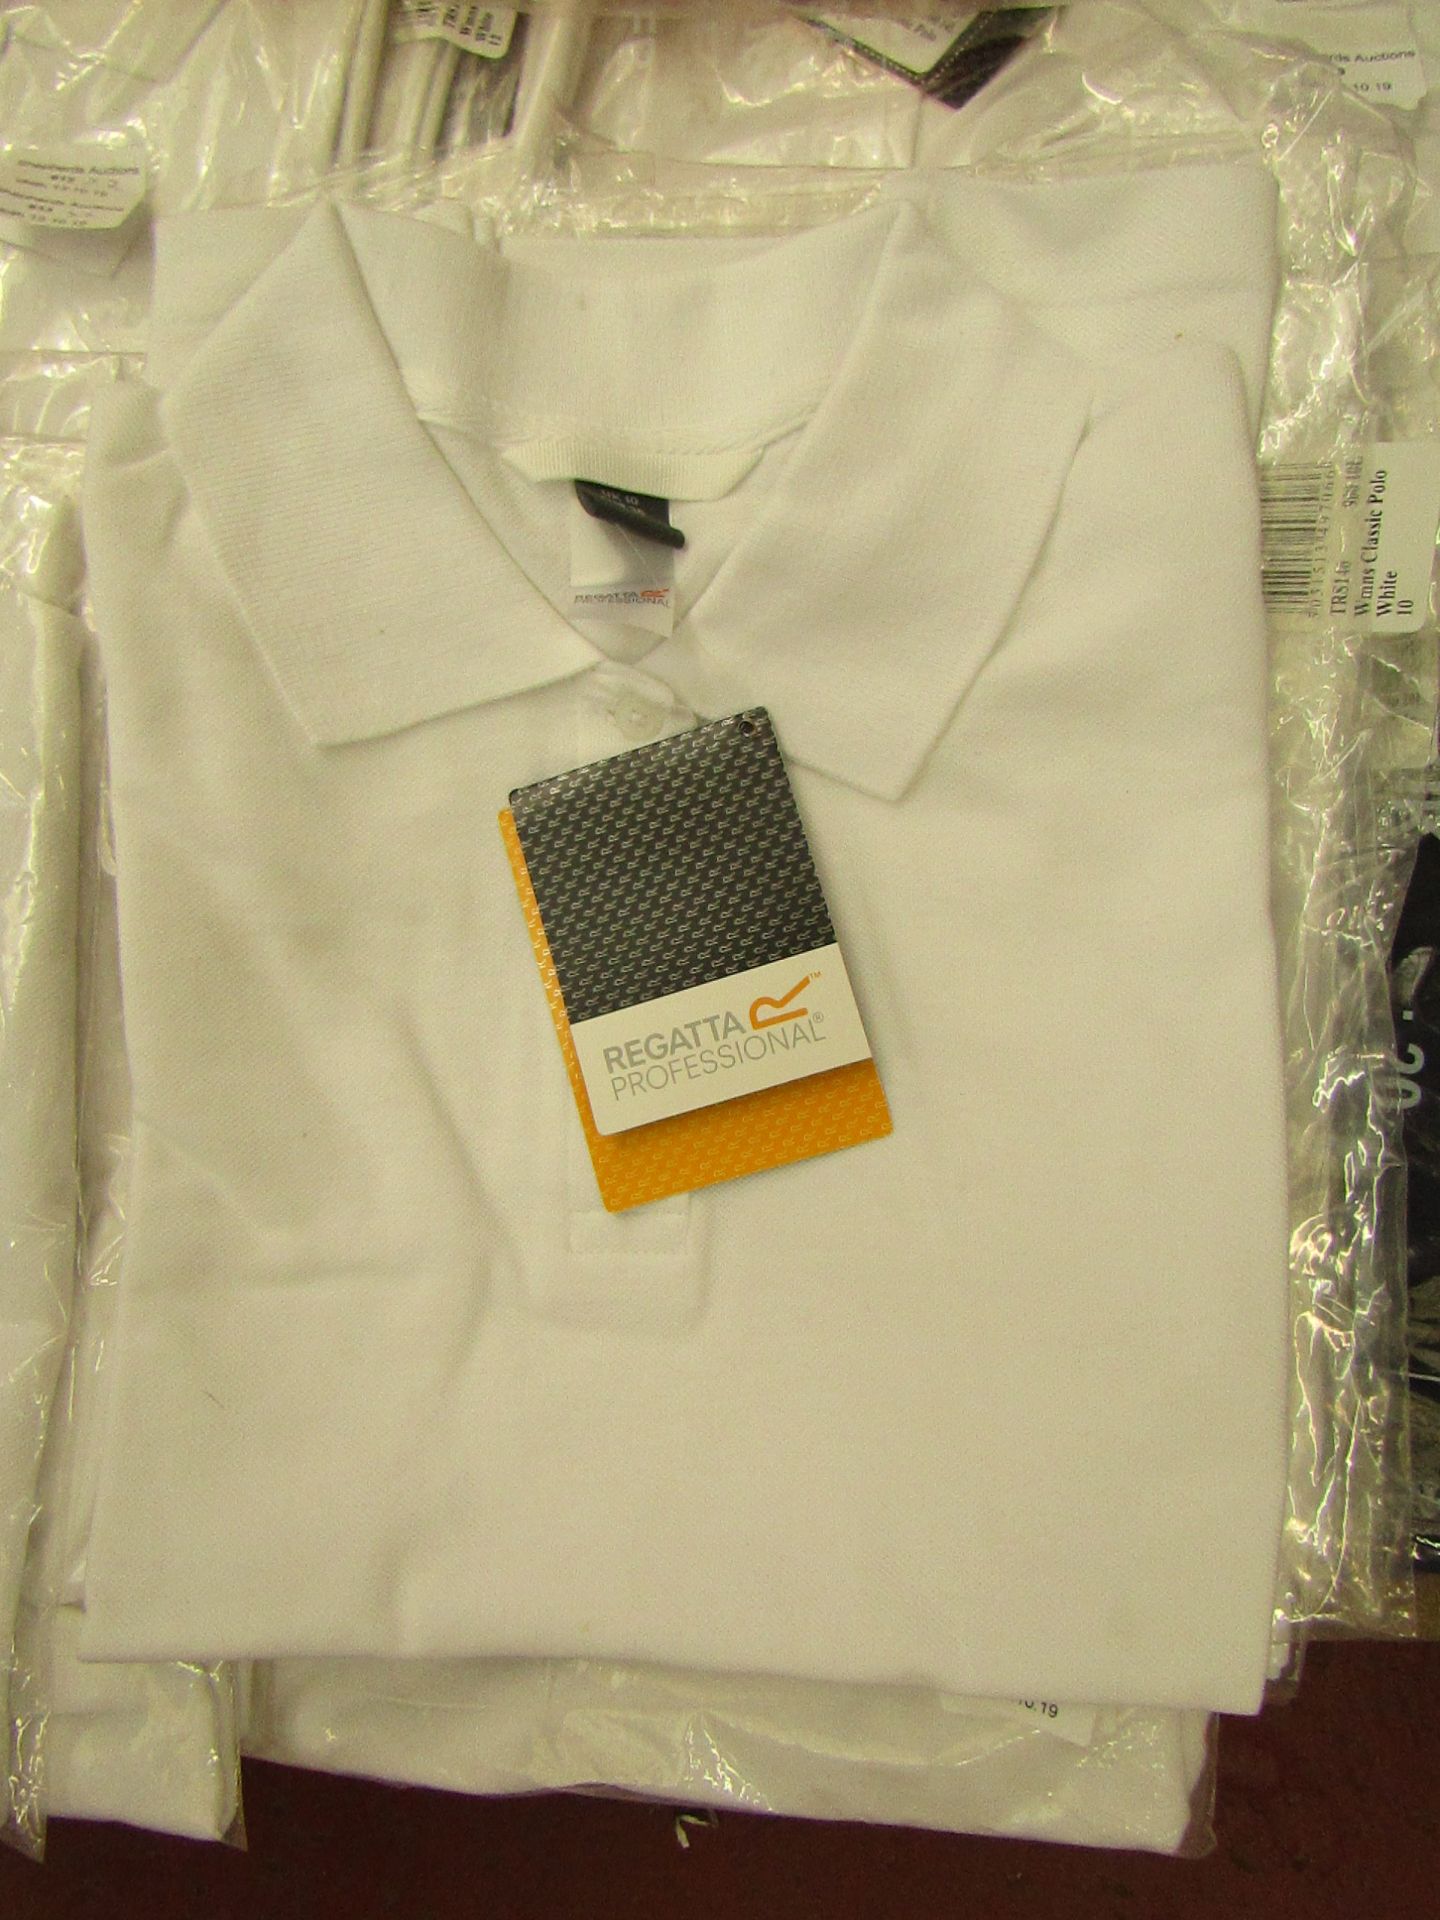 2 x Regatta Womens Classic Polo size 10 new & packaged